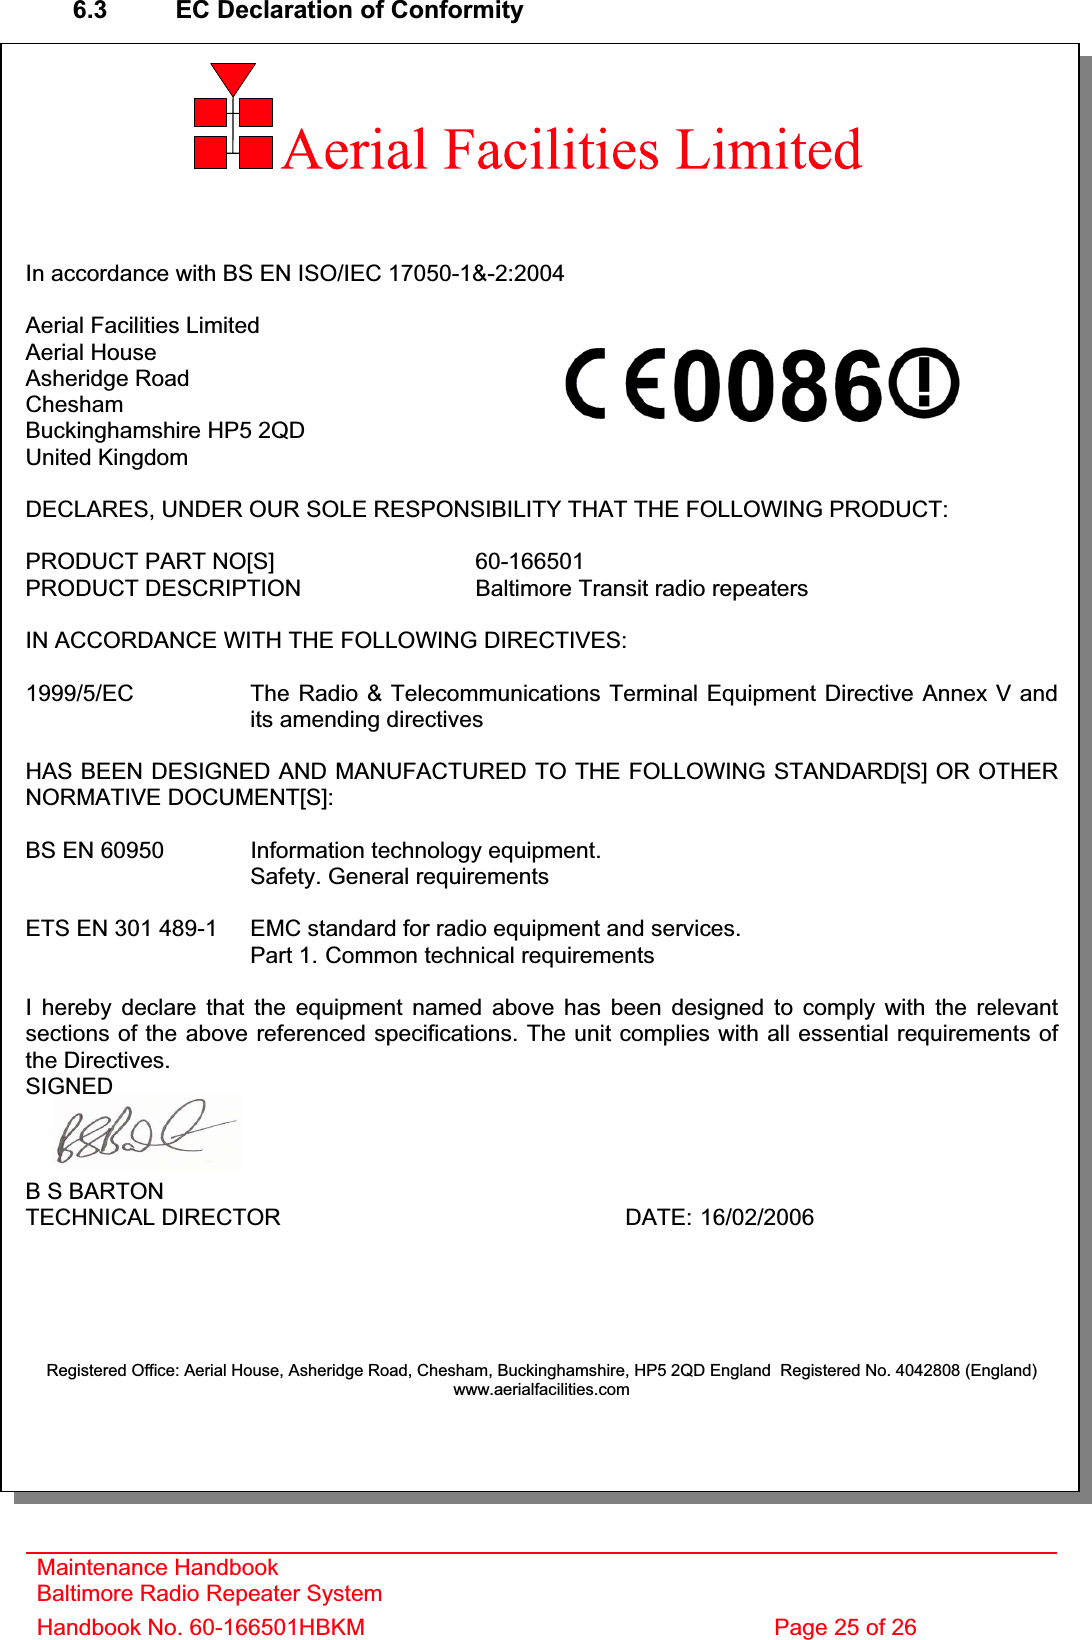 6.3  EC Declaration of Conformity In accordance with BS EN ISO/IEC 17050-1&amp;-2:2004 Aerial Facilities Limited Aerial House Asheridge Road CheshamBuckinghamshire HP5 2QD United Kingdom DECLARES, UNDER OUR SOLE RESPONSIBILITY THAT THE FOLLOWING PRODUCT: PRODUCT PART NO[S]  60-166501PRODUCT DESCRIPTION  Baltimore Transit radio repeaters IN ACCORDANCE WITH THE FOLLOWING DIRECTIVES: 1999/5/EC The Radio &amp; Telecommunications Terminal Equipment Directive Annex V and    its amending directivesHAS BEEN DESIGNED AND MANUFACTURED TO THE FOLLOWING STANDARD[S] OR OTHERNORMATIVE DOCUMENT[S]: BS EN 60950 Information technology equipment.   Safety. General requirementsETS EN 301 489-1  EMC standard for radio equipment and services.Part 1. Common technical requirements I hereby declare that the equipment named above has been designed to comply with the relevant sections of the above referenced specifications. The unit complies with all essential requirements of the Directives. SIGNEDB S BARTON TECHNICAL DIRECTOR     DATE: 16/02/2006Registered Office: Aerial House, Asheridge Road, Chesham, Buckinghamshire, HP5 2QD England  Registered No. 4042808 (England) www.aerialfacilities.comMaintenance Handbook Baltimore Radio Repeater System Handbook No. 60-166501HBKM  Page 25 of 26 